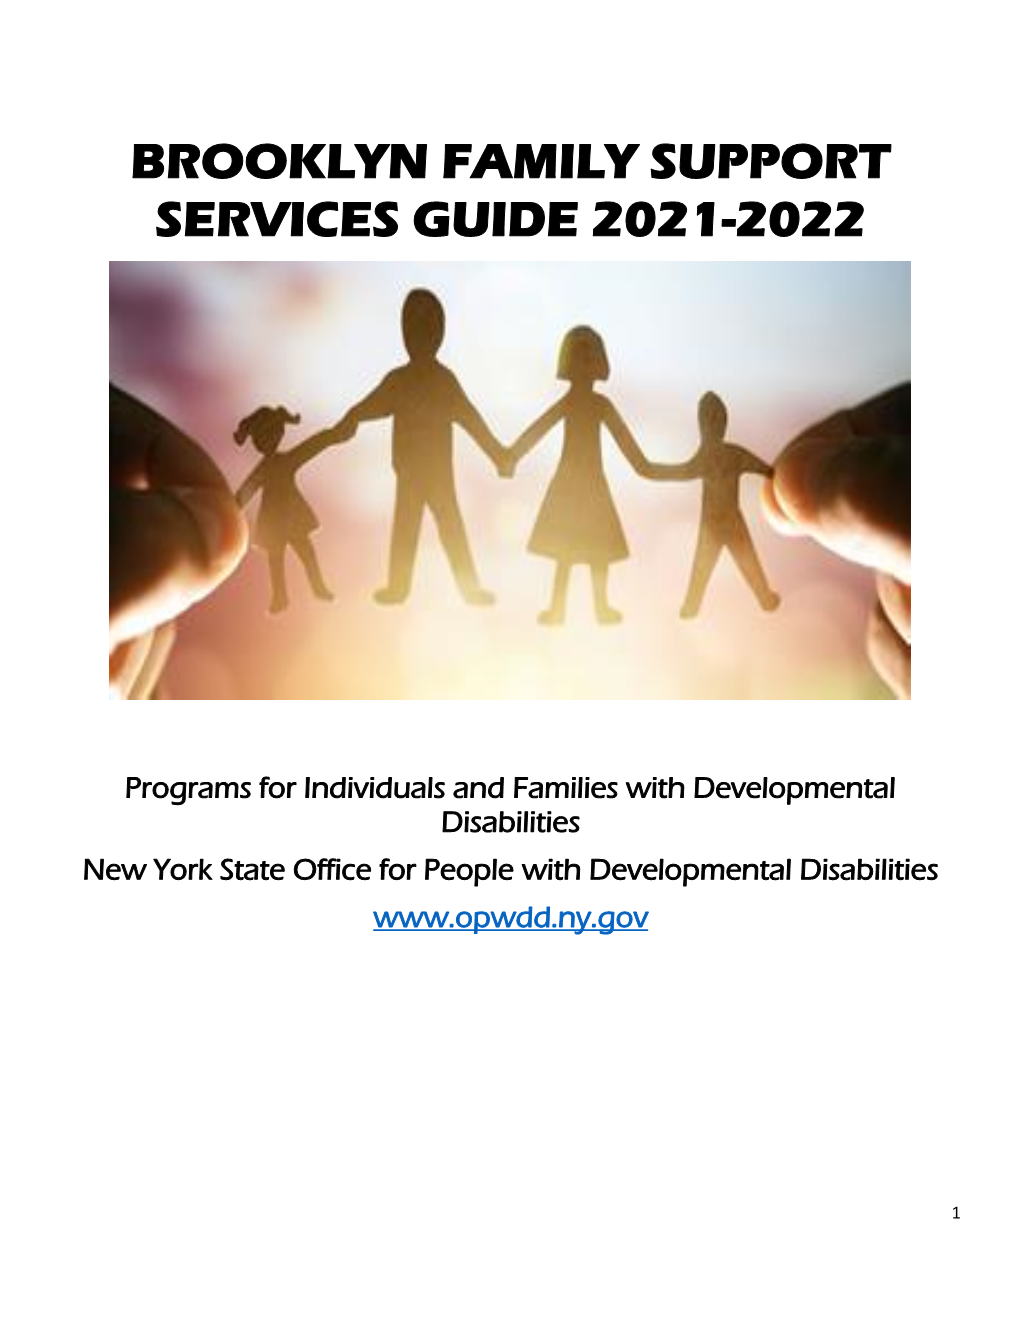 Brooklyn Family Support Services Guide 2021-2022